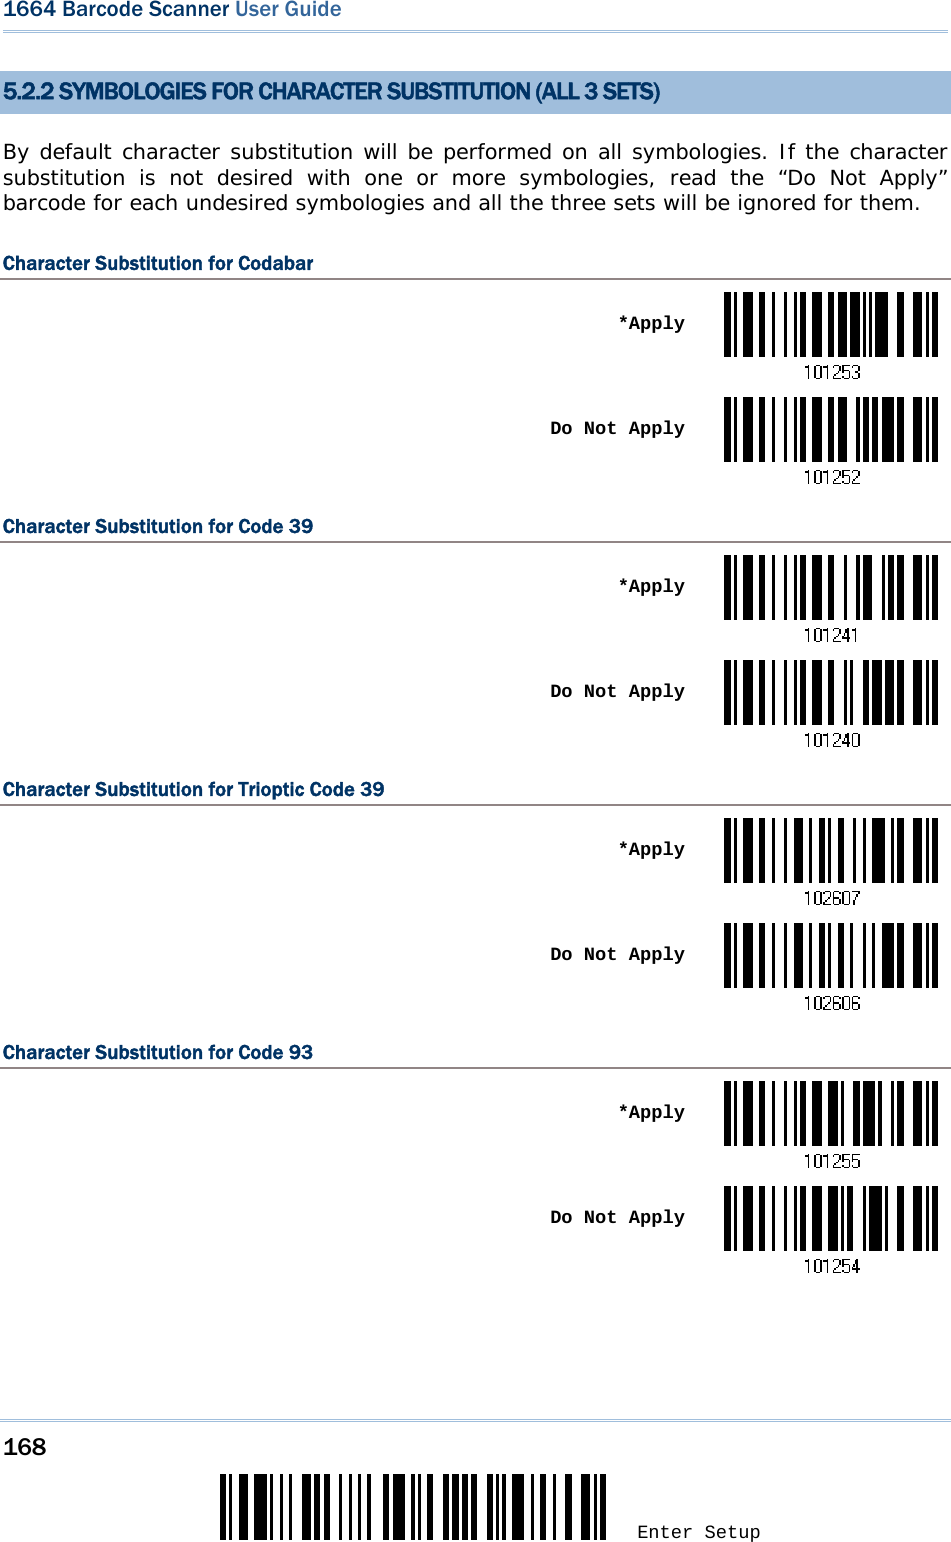 168 Enter Setup 1664 Barcode Scanner User Guide  5.2.2 SYMBOLOGIES FOR CHARACTER SUBSTITUTION (ALL 3 SETS) By default character substitution will be performed on all symbologies. If the character substitution is not desired with one or more symbologies, read the “Do Not Apply” barcode for each undesired symbologies and all the three sets will be ignored for them. Character Substitution for Codabar  *Apply Do Not ApplyCharacter Substitution for Code 39  *Apply Do Not ApplyCharacter Substitution for Trioptic Code 39  *Apply Do Not ApplyCharacter Substitution for Code 93  *Apply Do Not Apply   